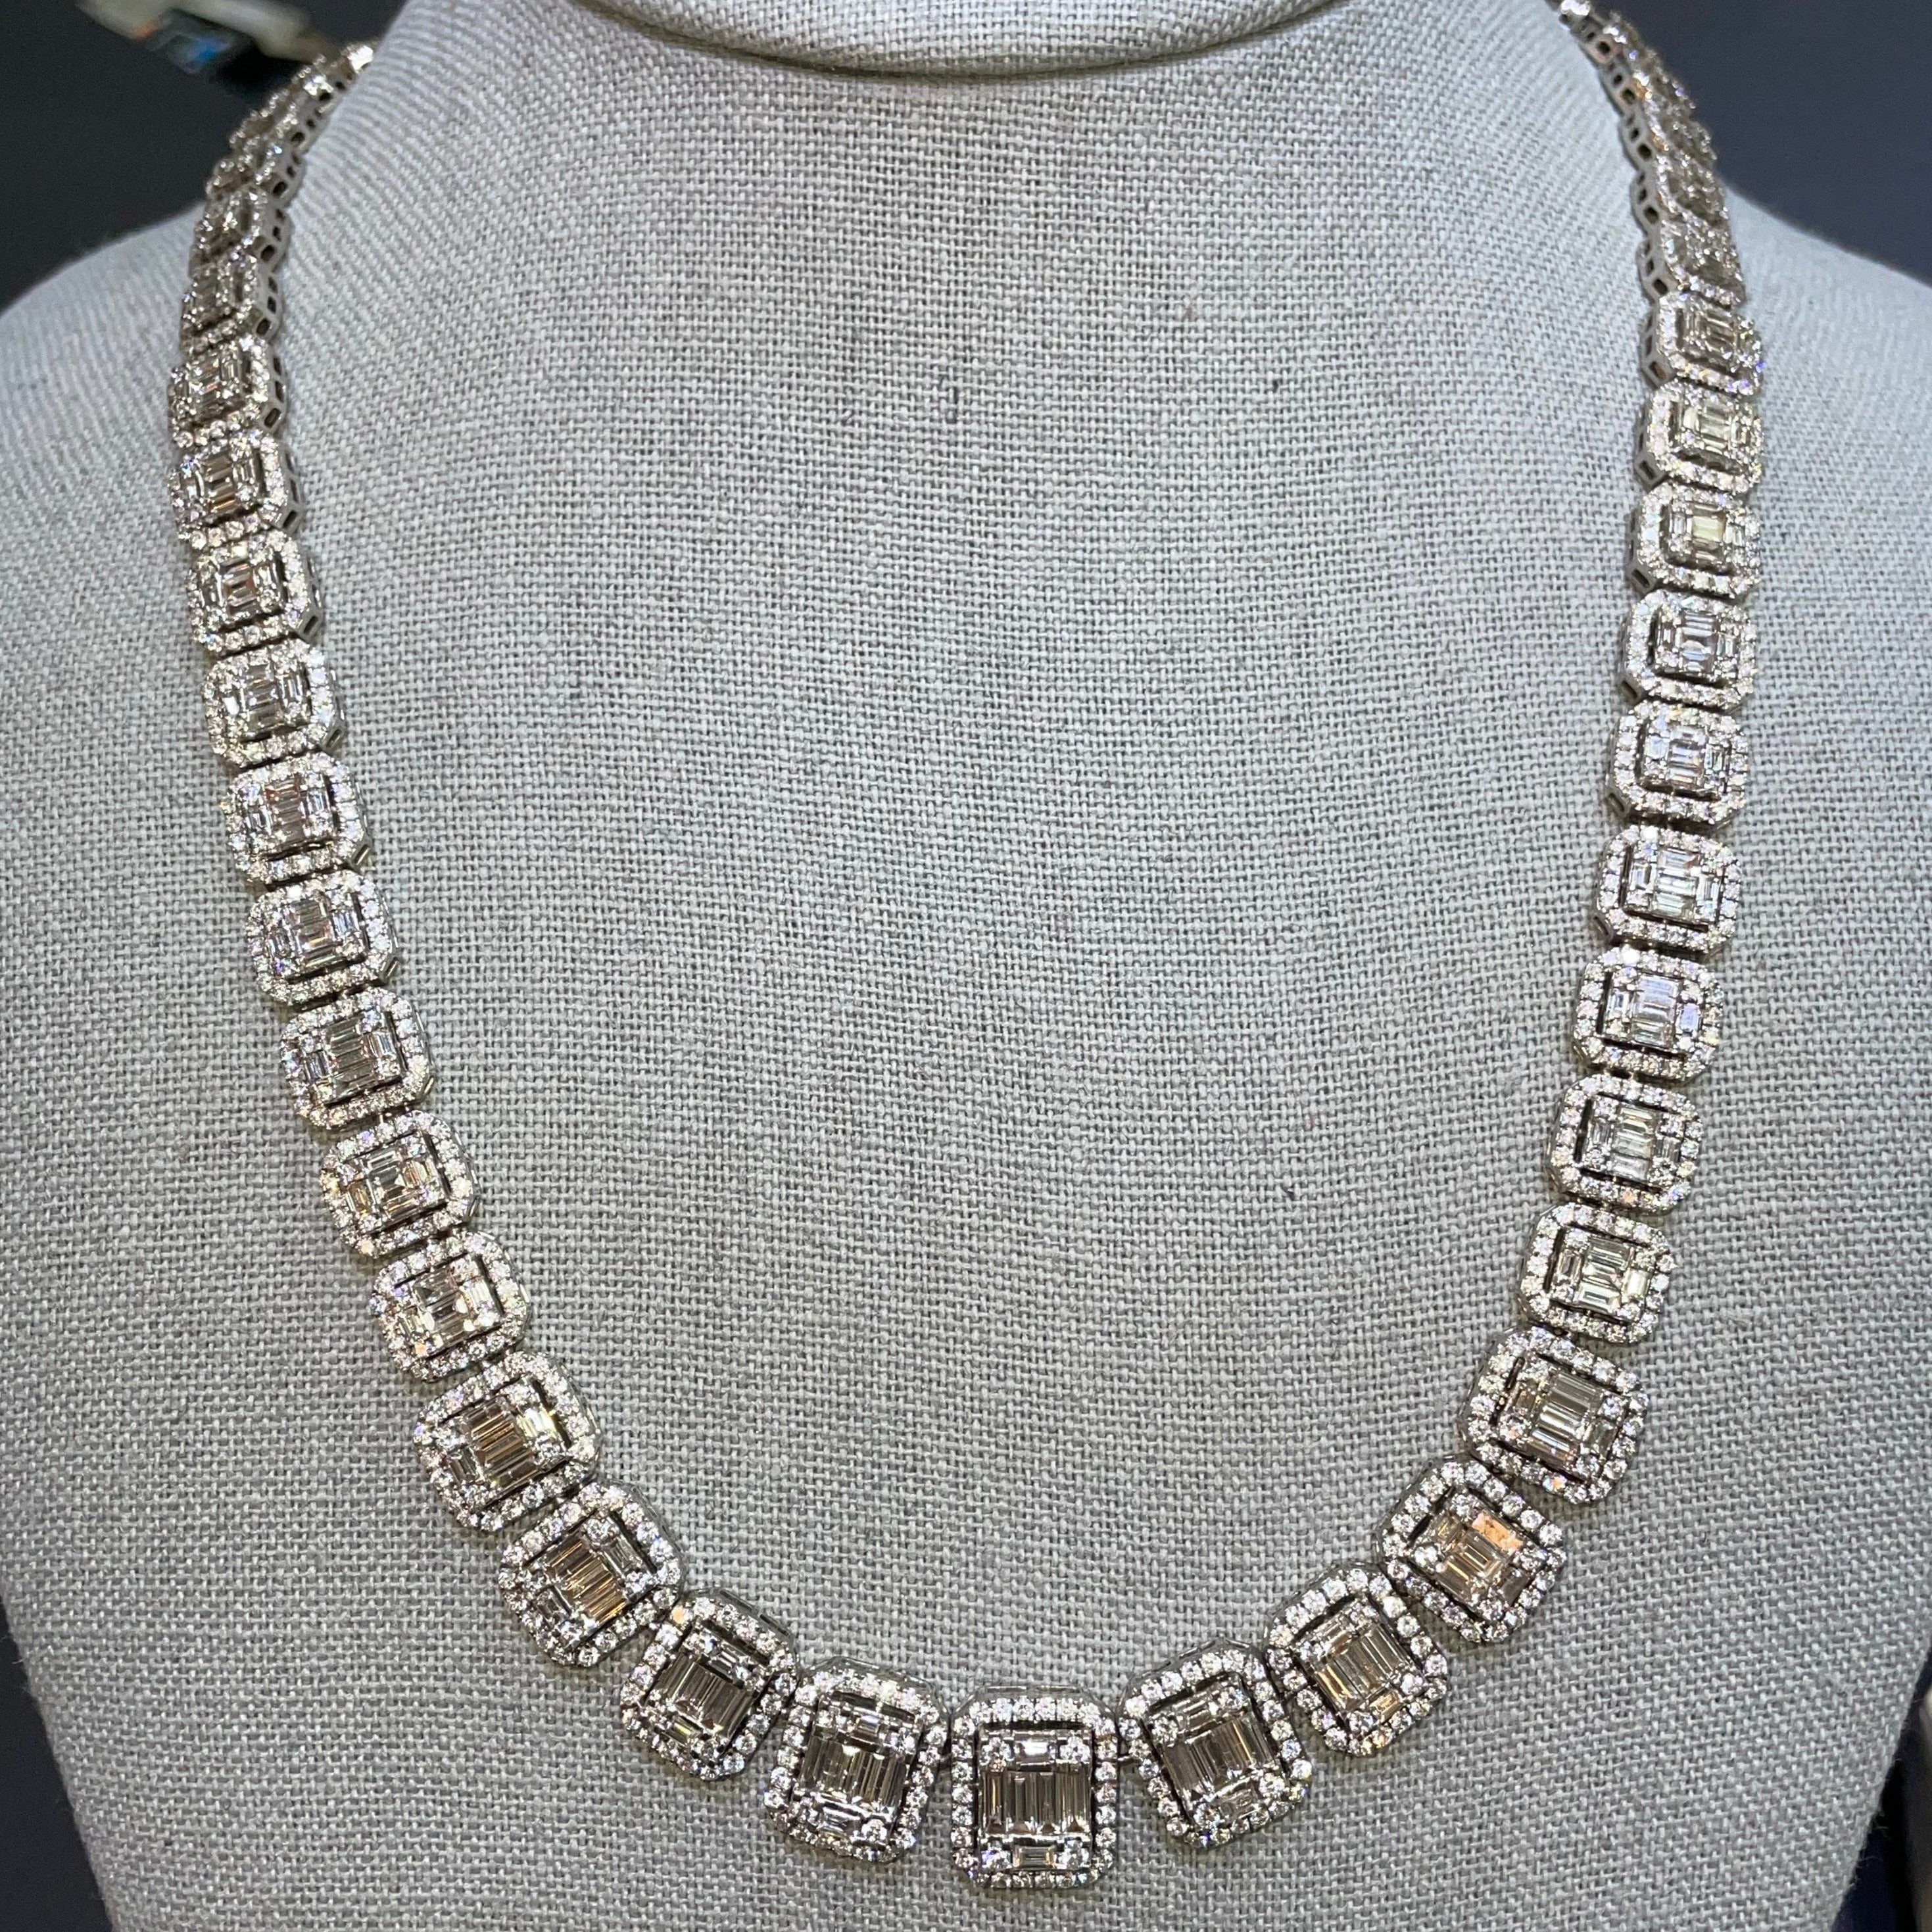 vvs baguette chain iced 32 cts natural diamonds t.w. 24 inches bust down chain